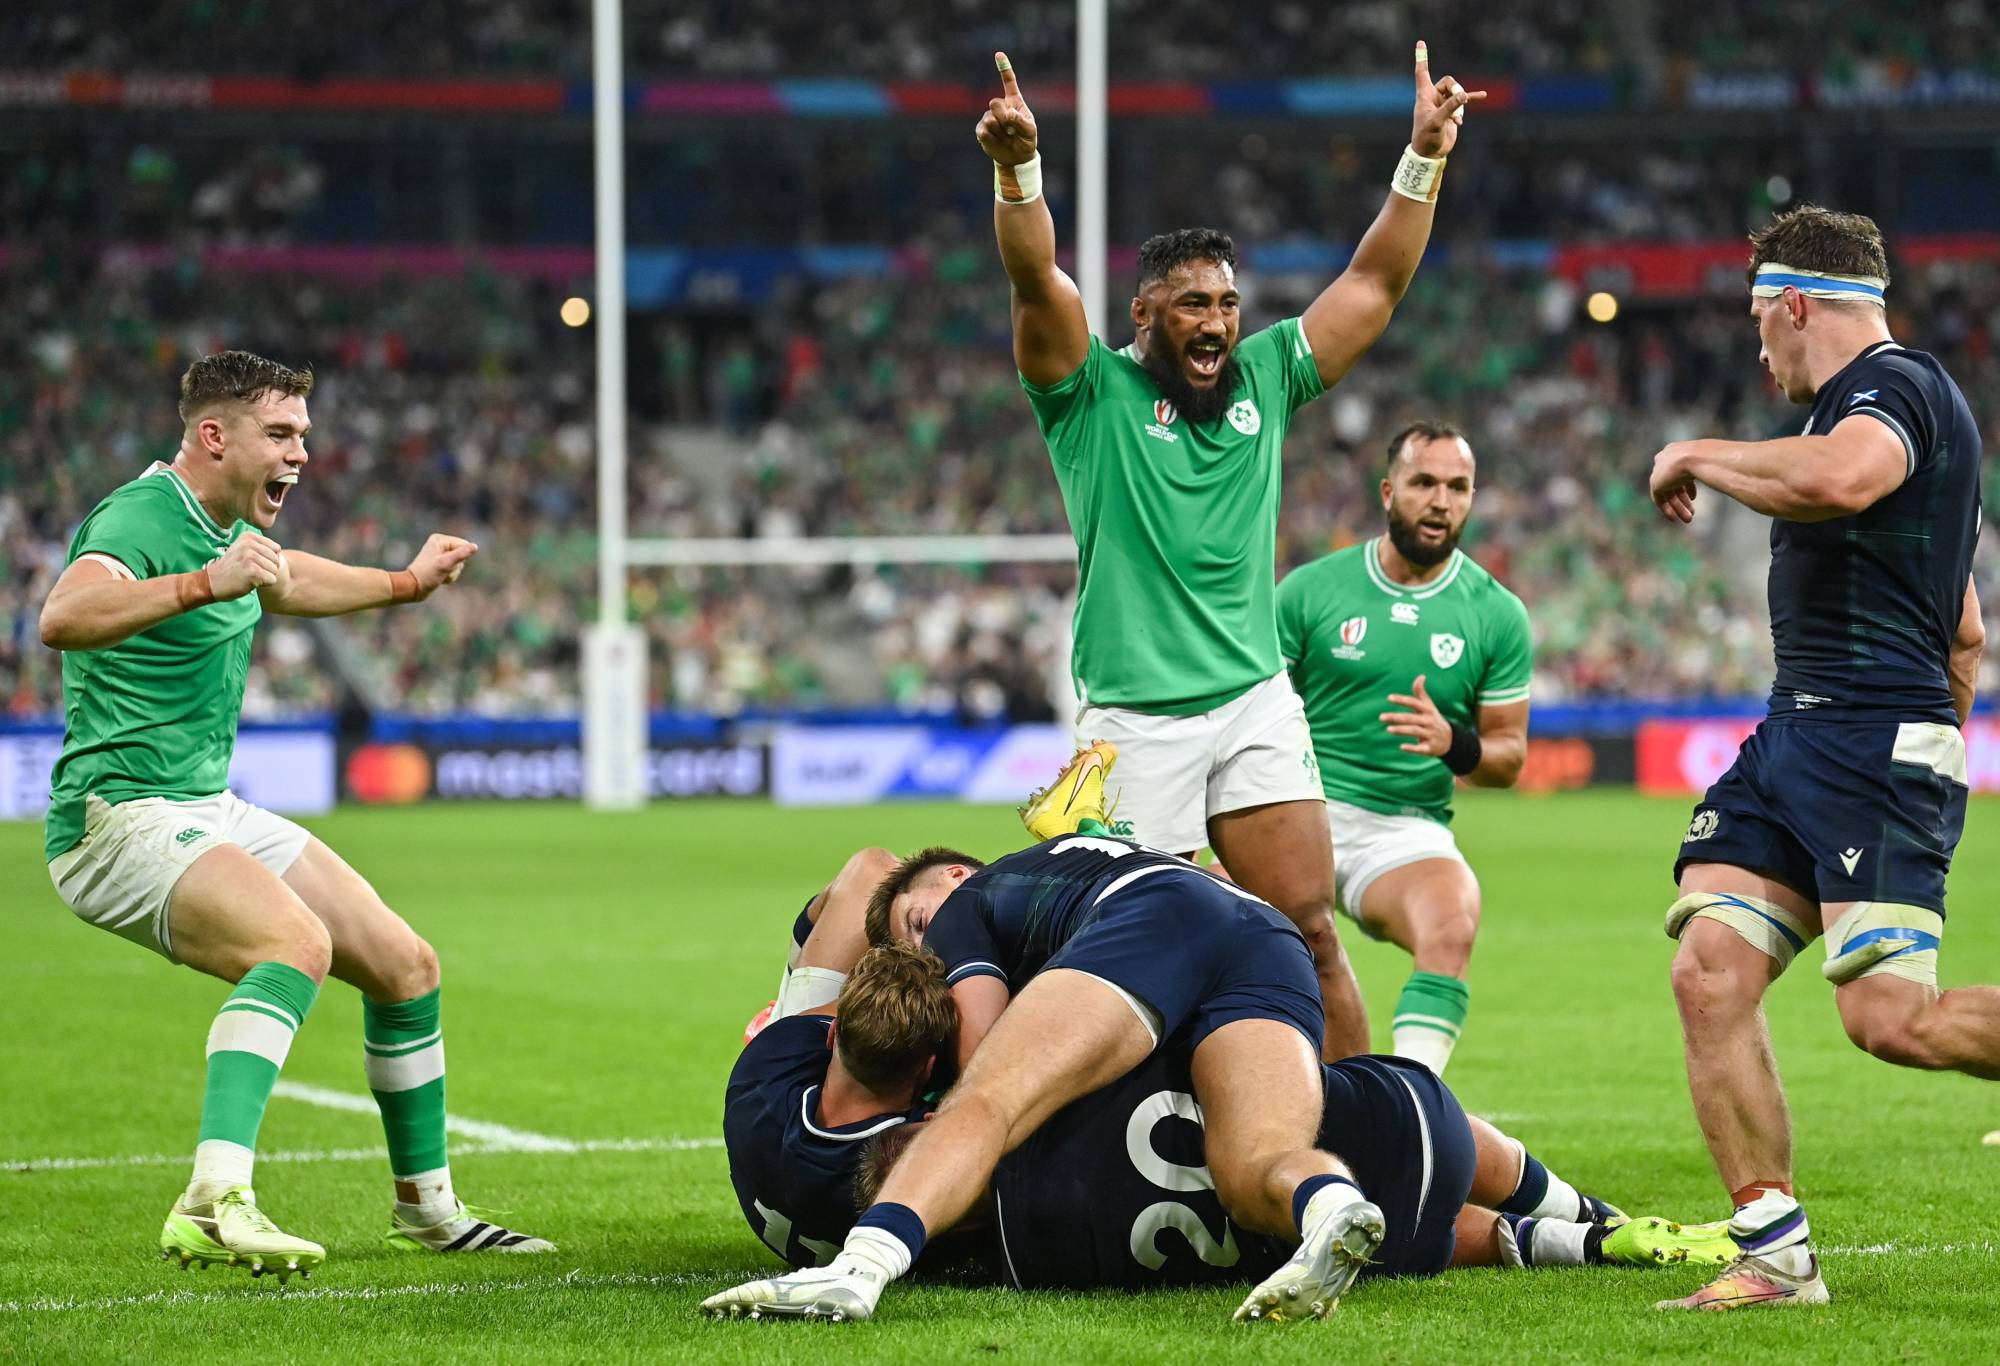 Hugo Keenan of Ireland, hidden, scores his side's fourth try, despite the efforts of Scotland's Duhan van der Merwe, left, and Matt Fagerson, as teammates Garry Ringrose, left, and Bundee Aki celebrate, during the 2023 Rugby World Cup Pool B match between Ireland and Scotland at the Stade de France in Paris, France. (Photo By Ramsey Cardy/Sportsfile via Getty Images)